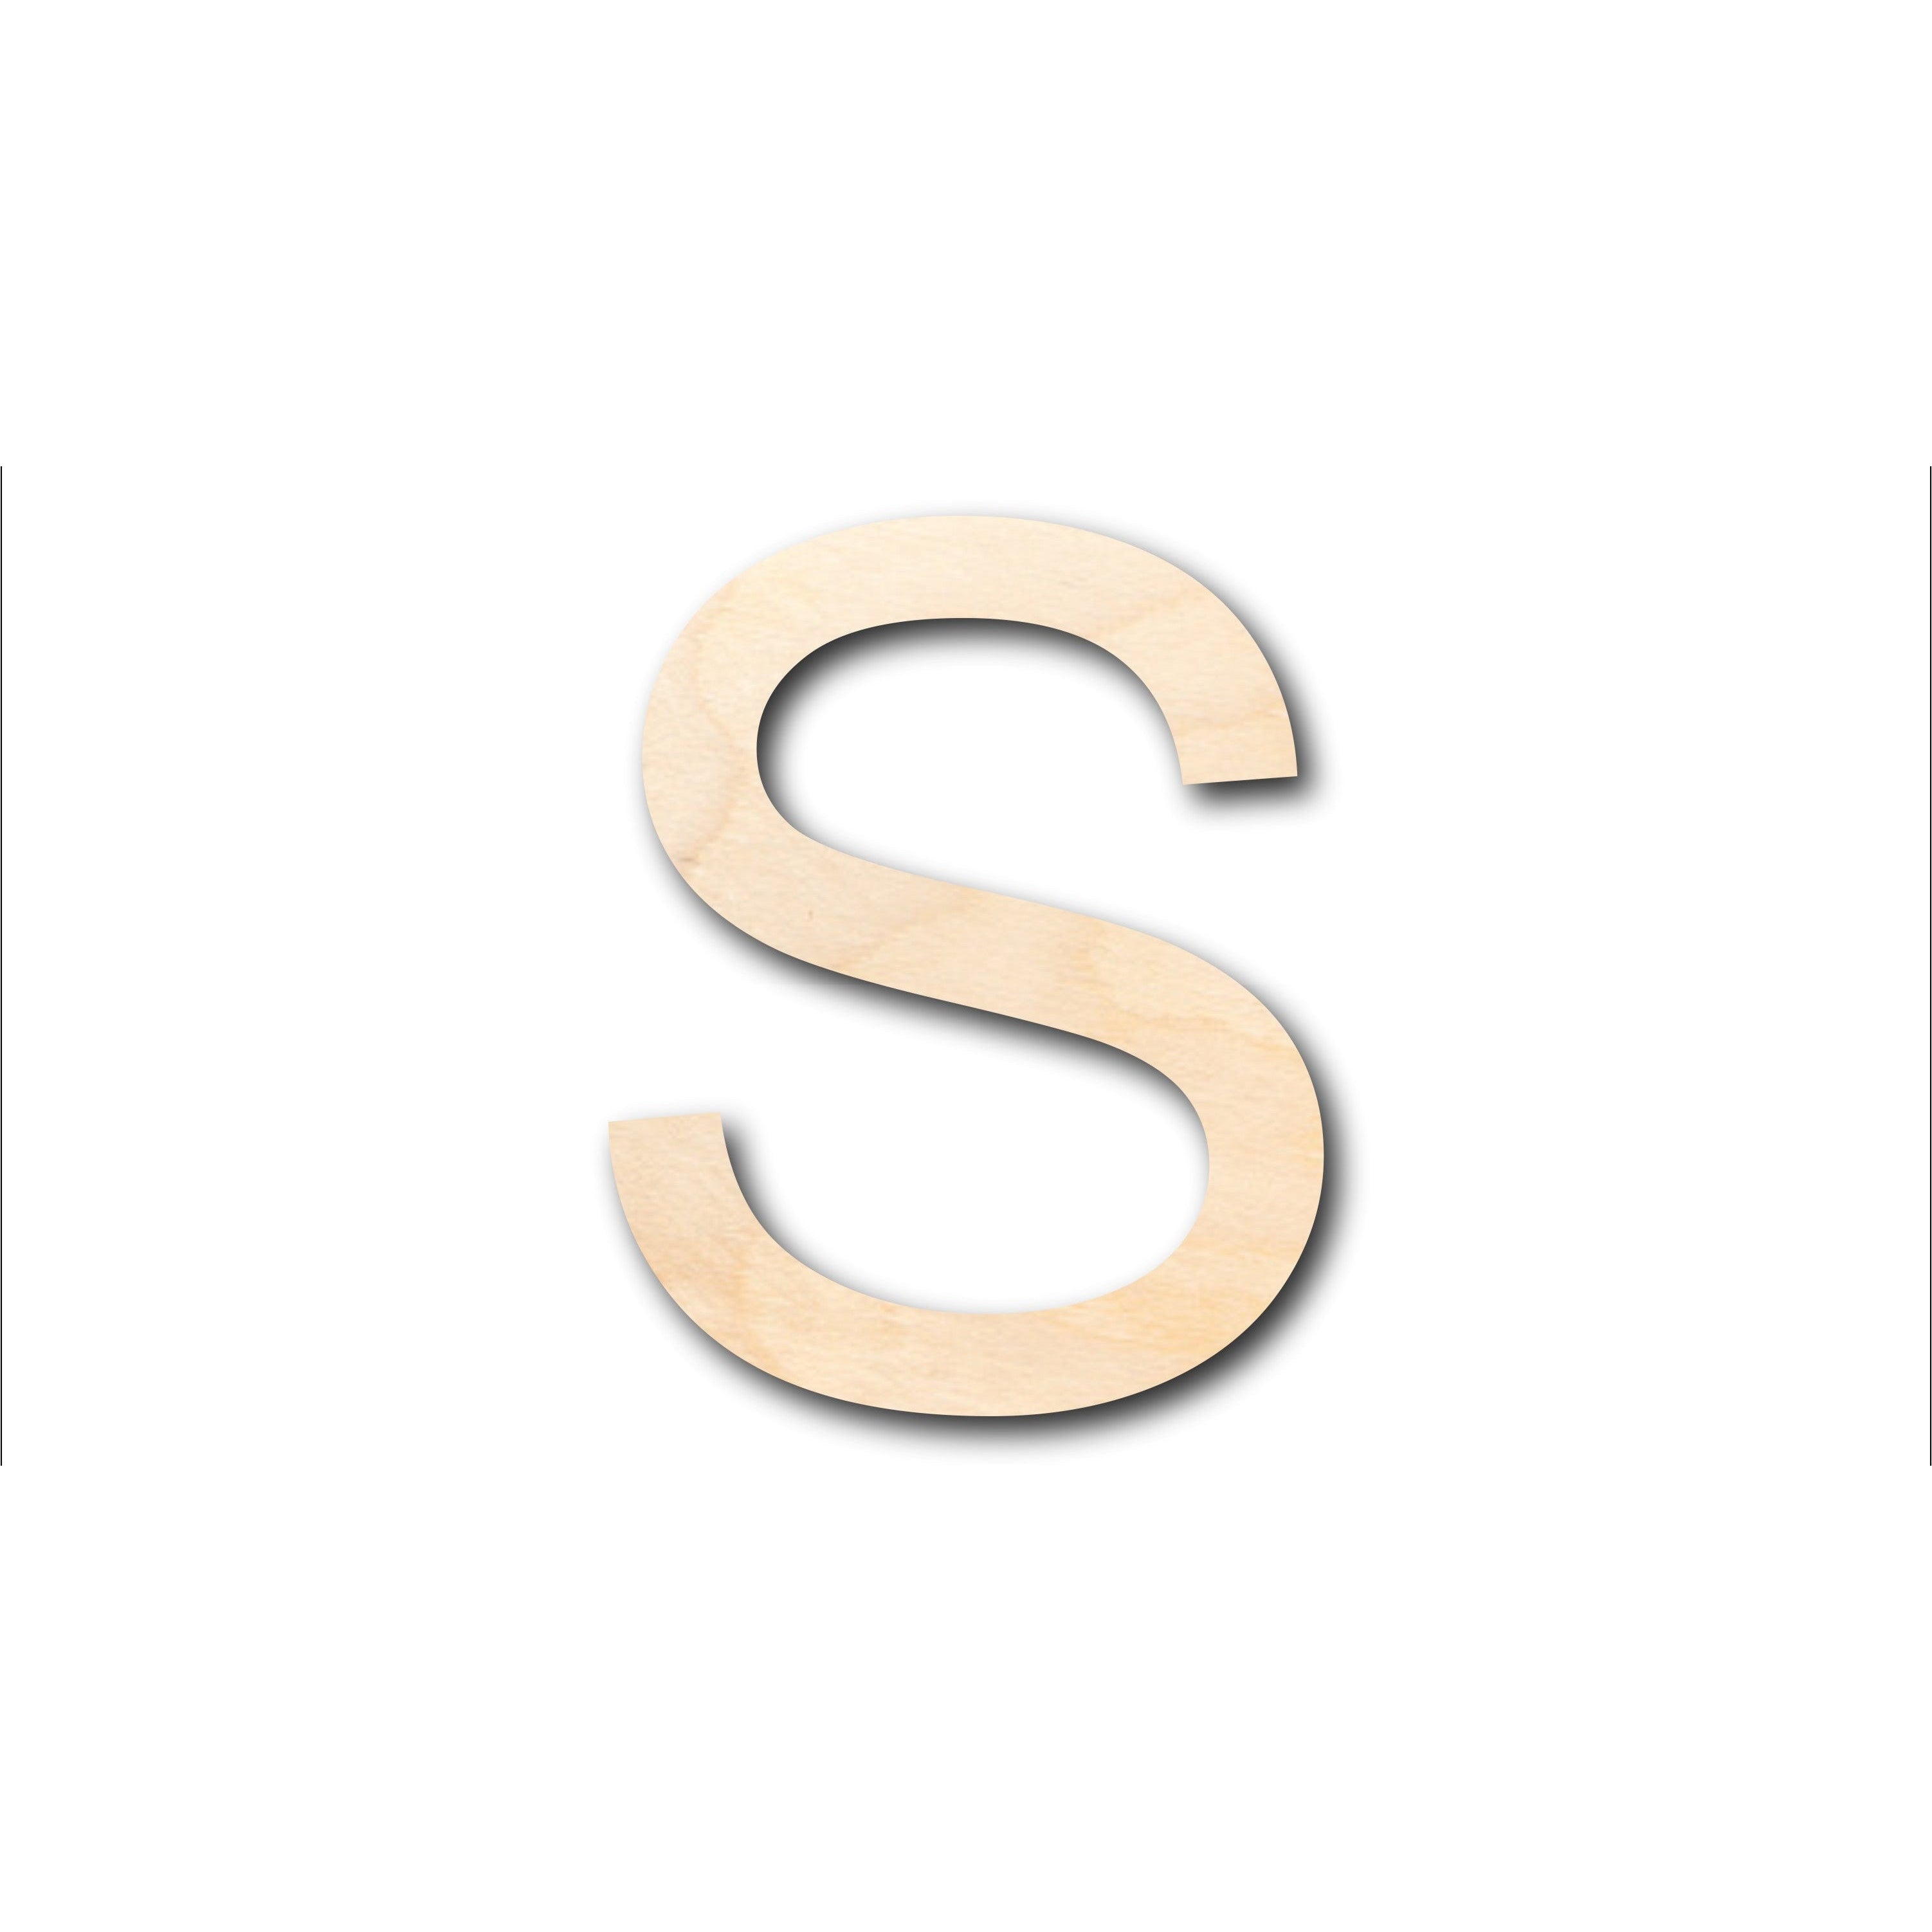 Unfinished Wood Arial Letter S Shape - Craft - up to 36